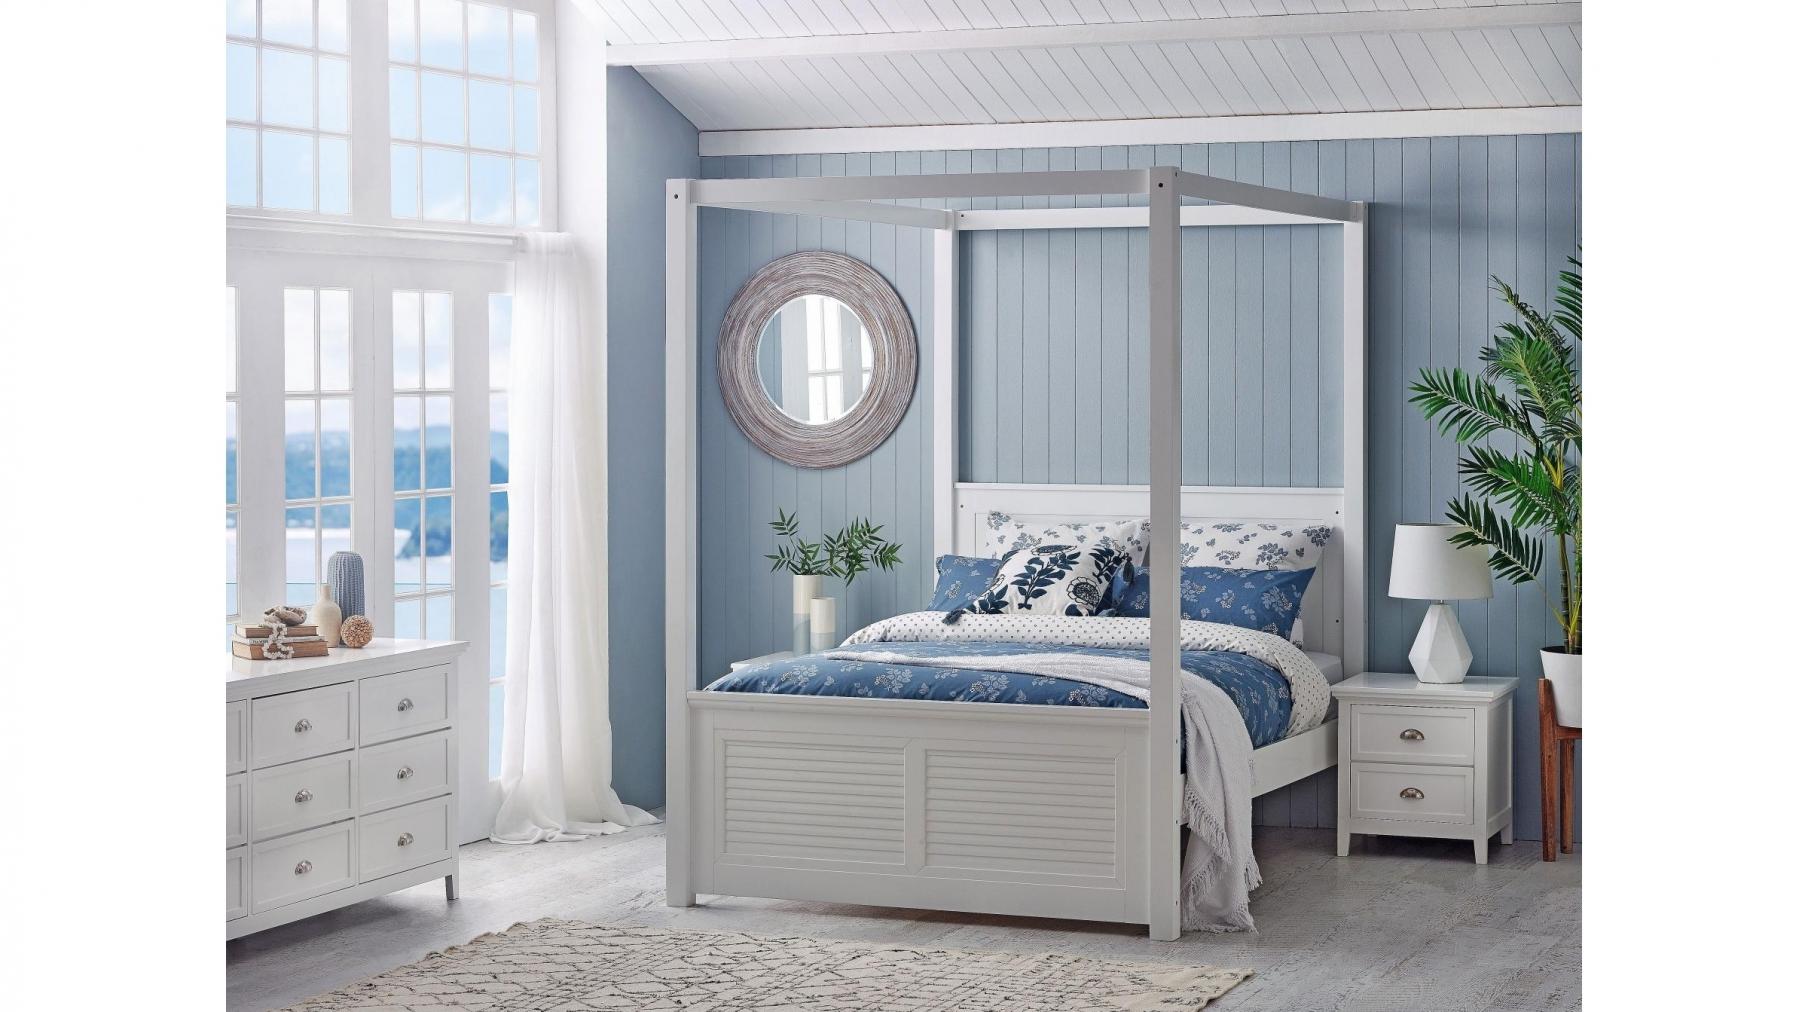 Lilly 4 Poster Bed King Harvey, 4 Poster Bed Frame King Size